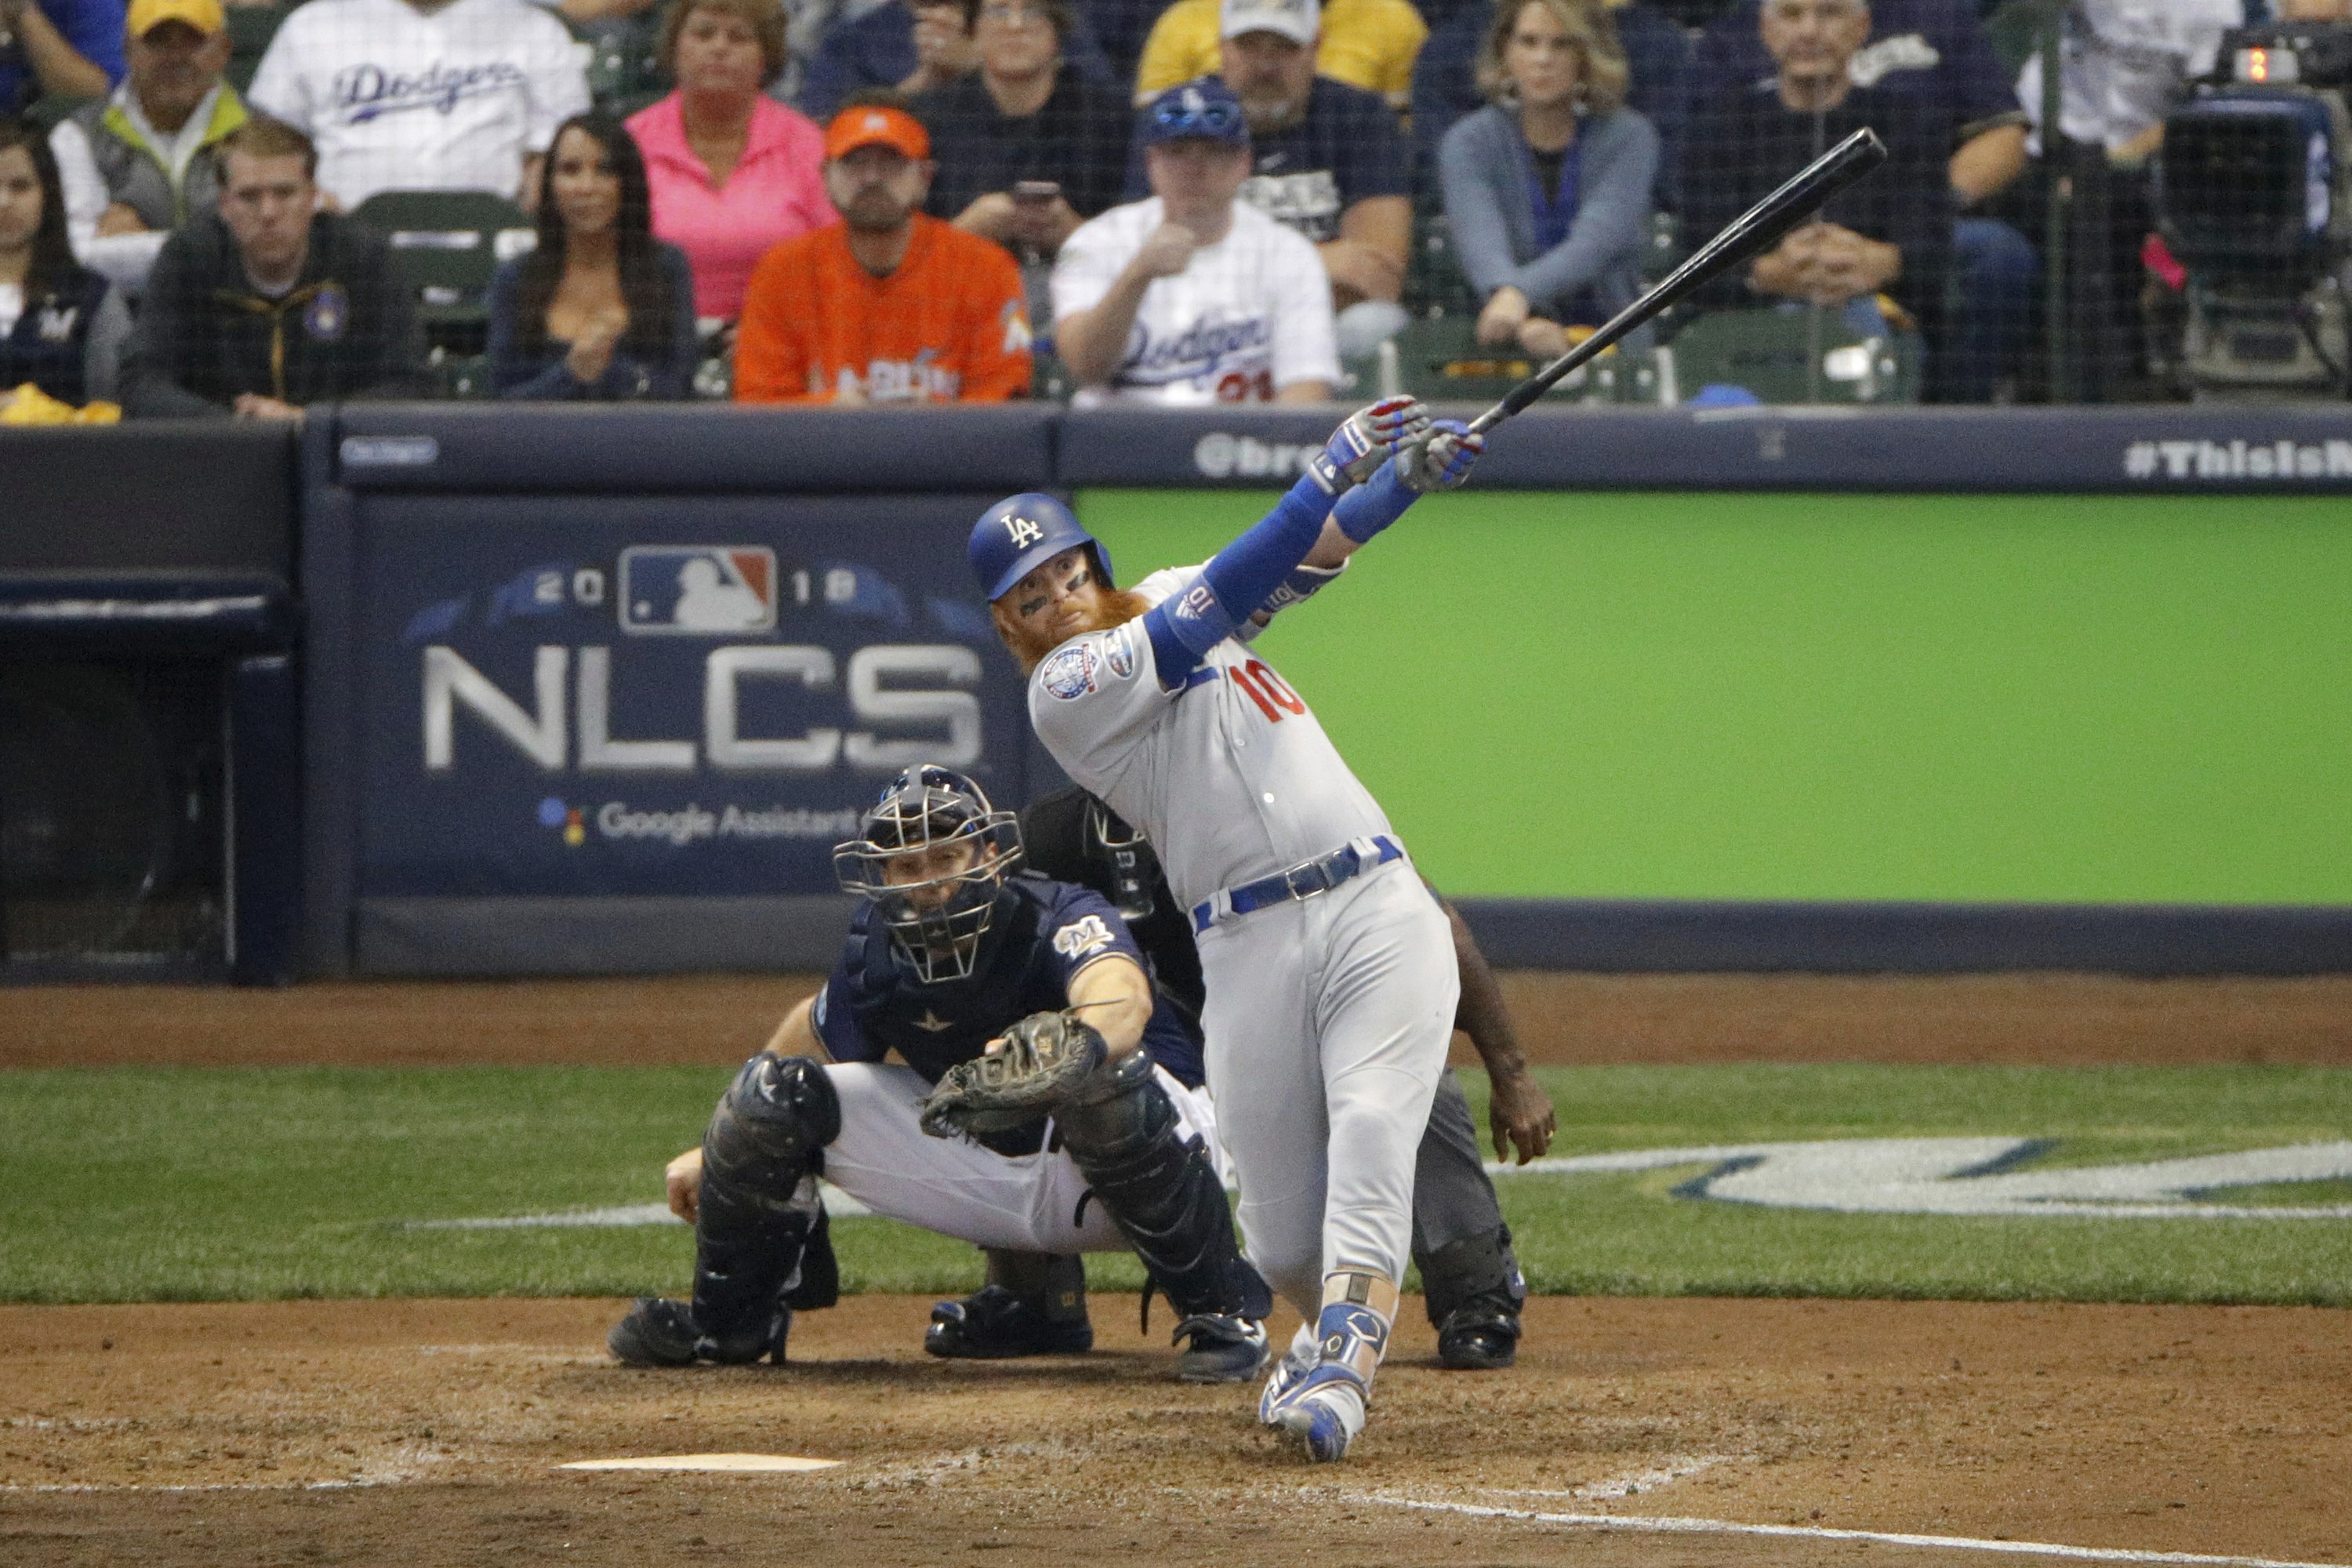 Turner homers as Dodgers beat Brewers 4-3 in NLCS Game 2